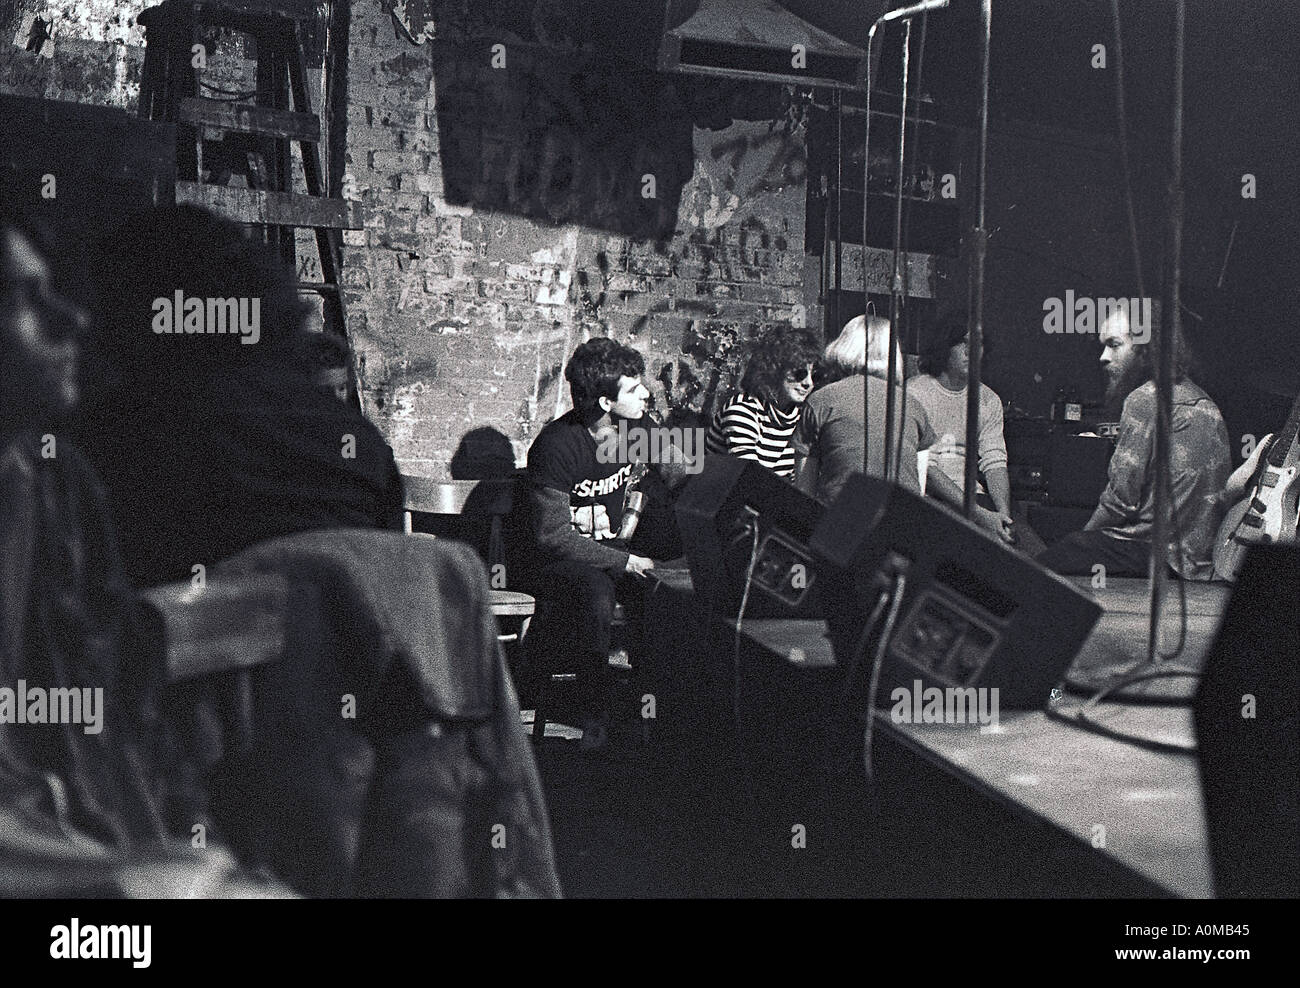 New York, NY, USA, Small Crowd Young People, 'CBGBs Nightclub' Interior Scene with Owner Relaxing Near Stage, punk nightclub 1970s Stock Photo